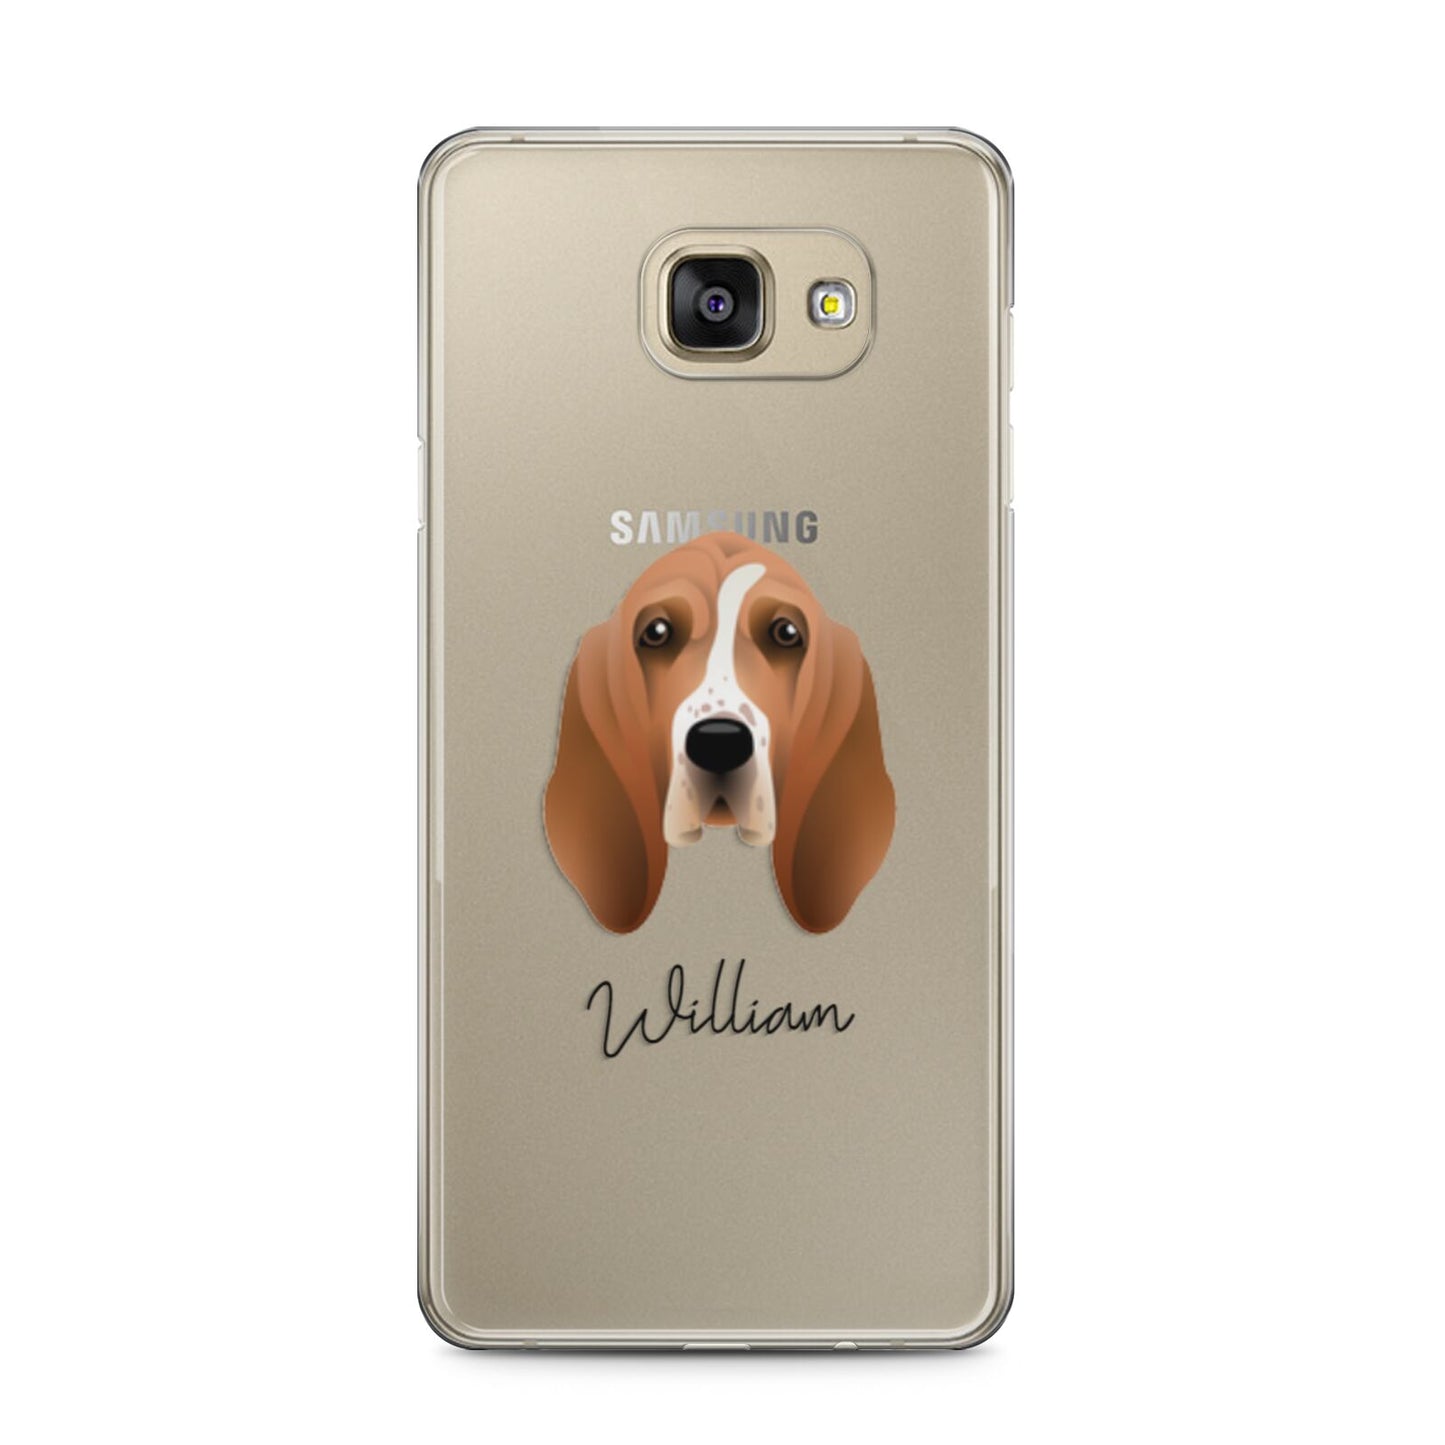 Basset Hound Personalised Samsung Galaxy A5 2016 Case on gold phone